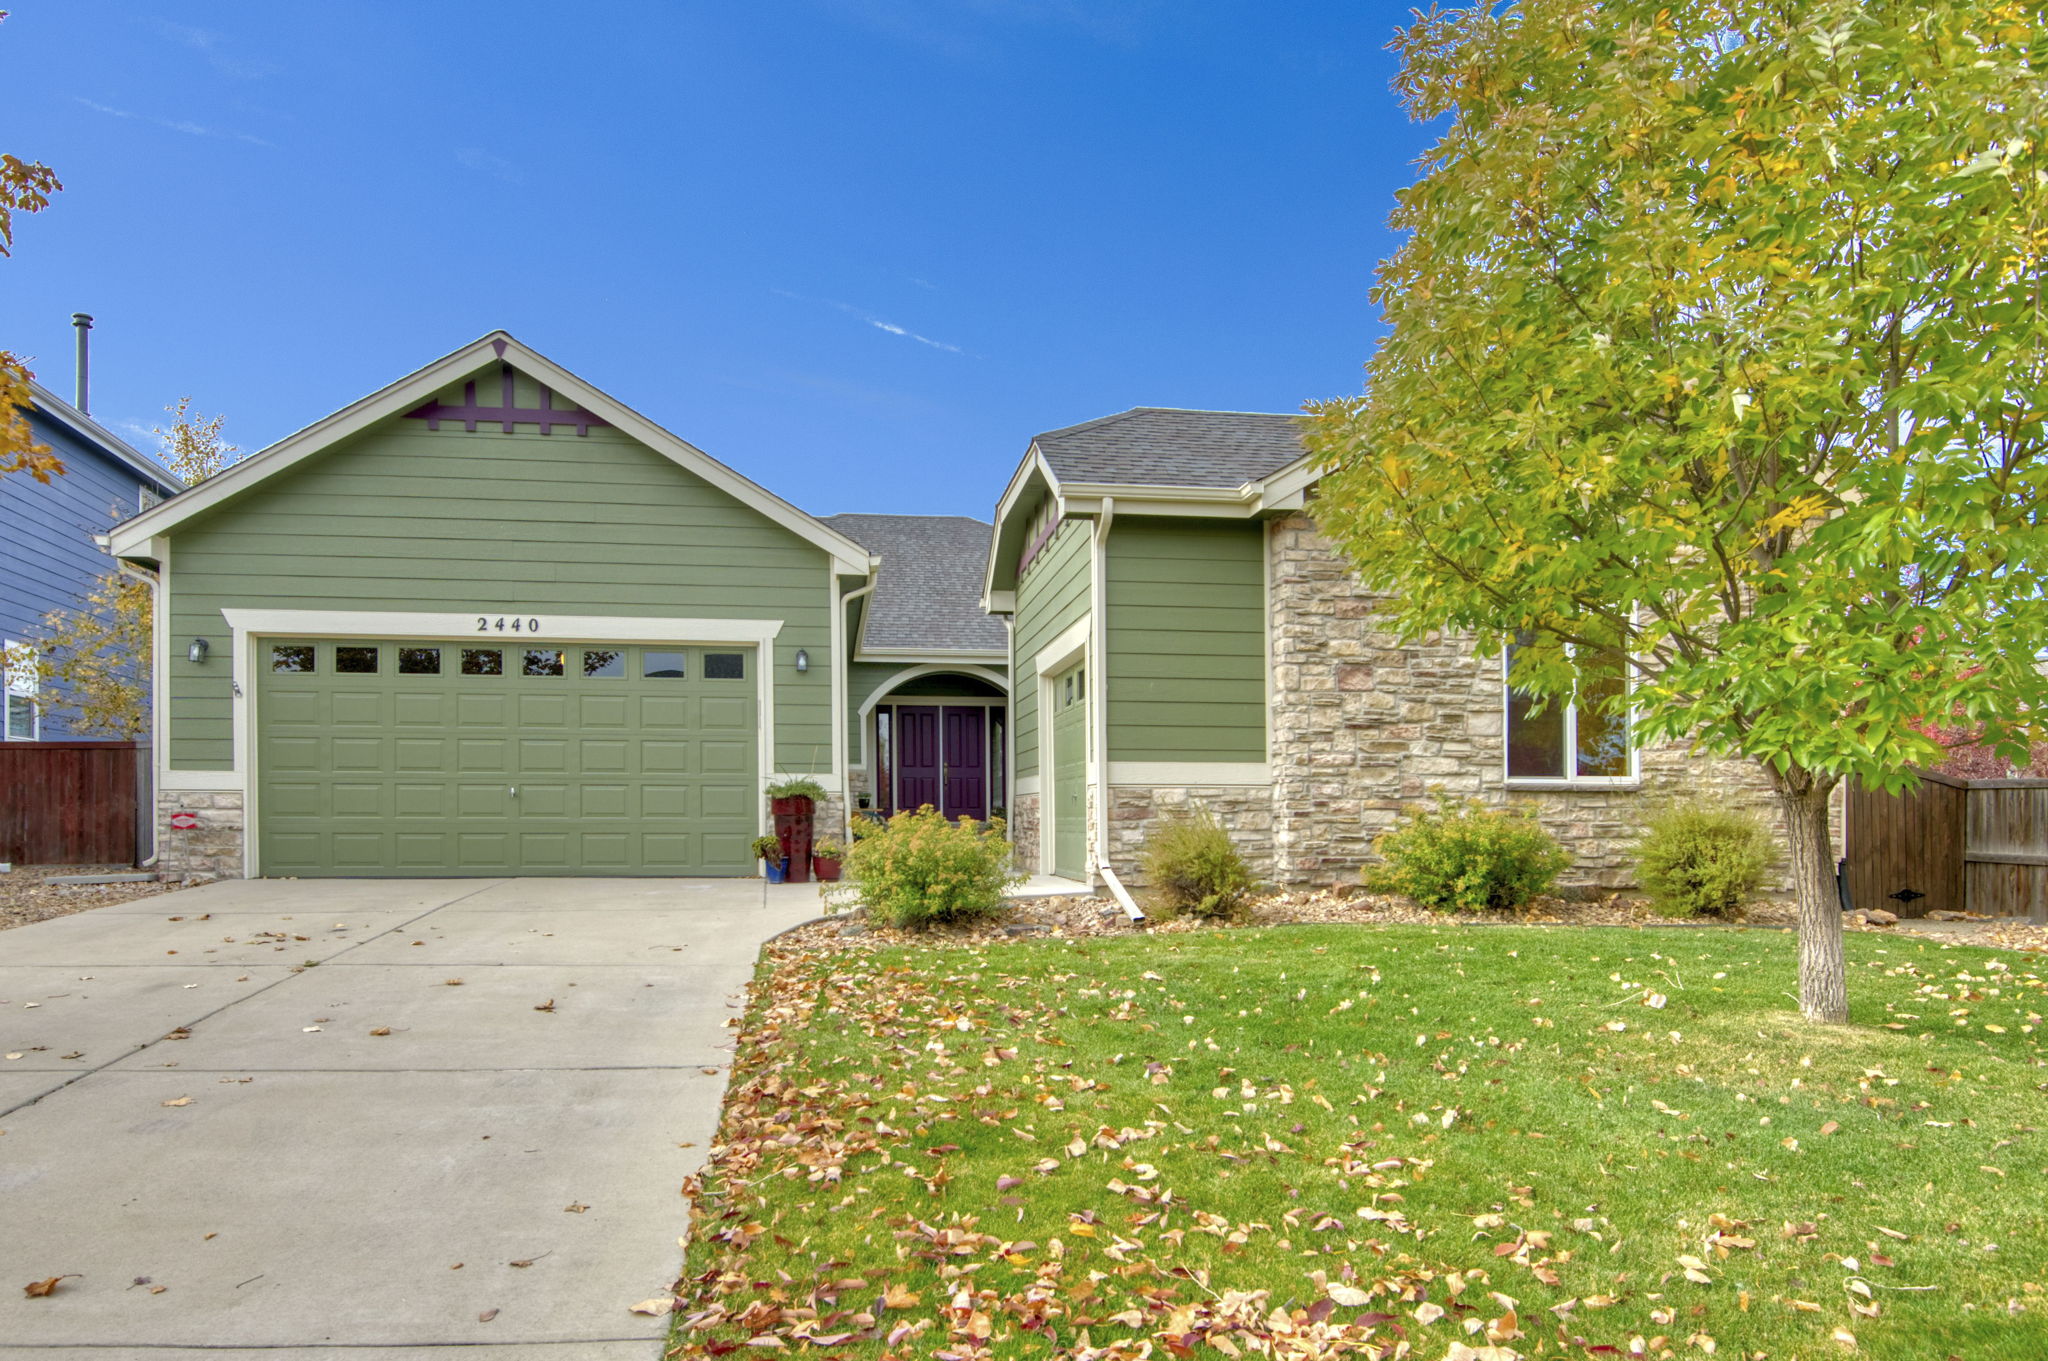  2440 Vale Way, Erie, CO 80516, US